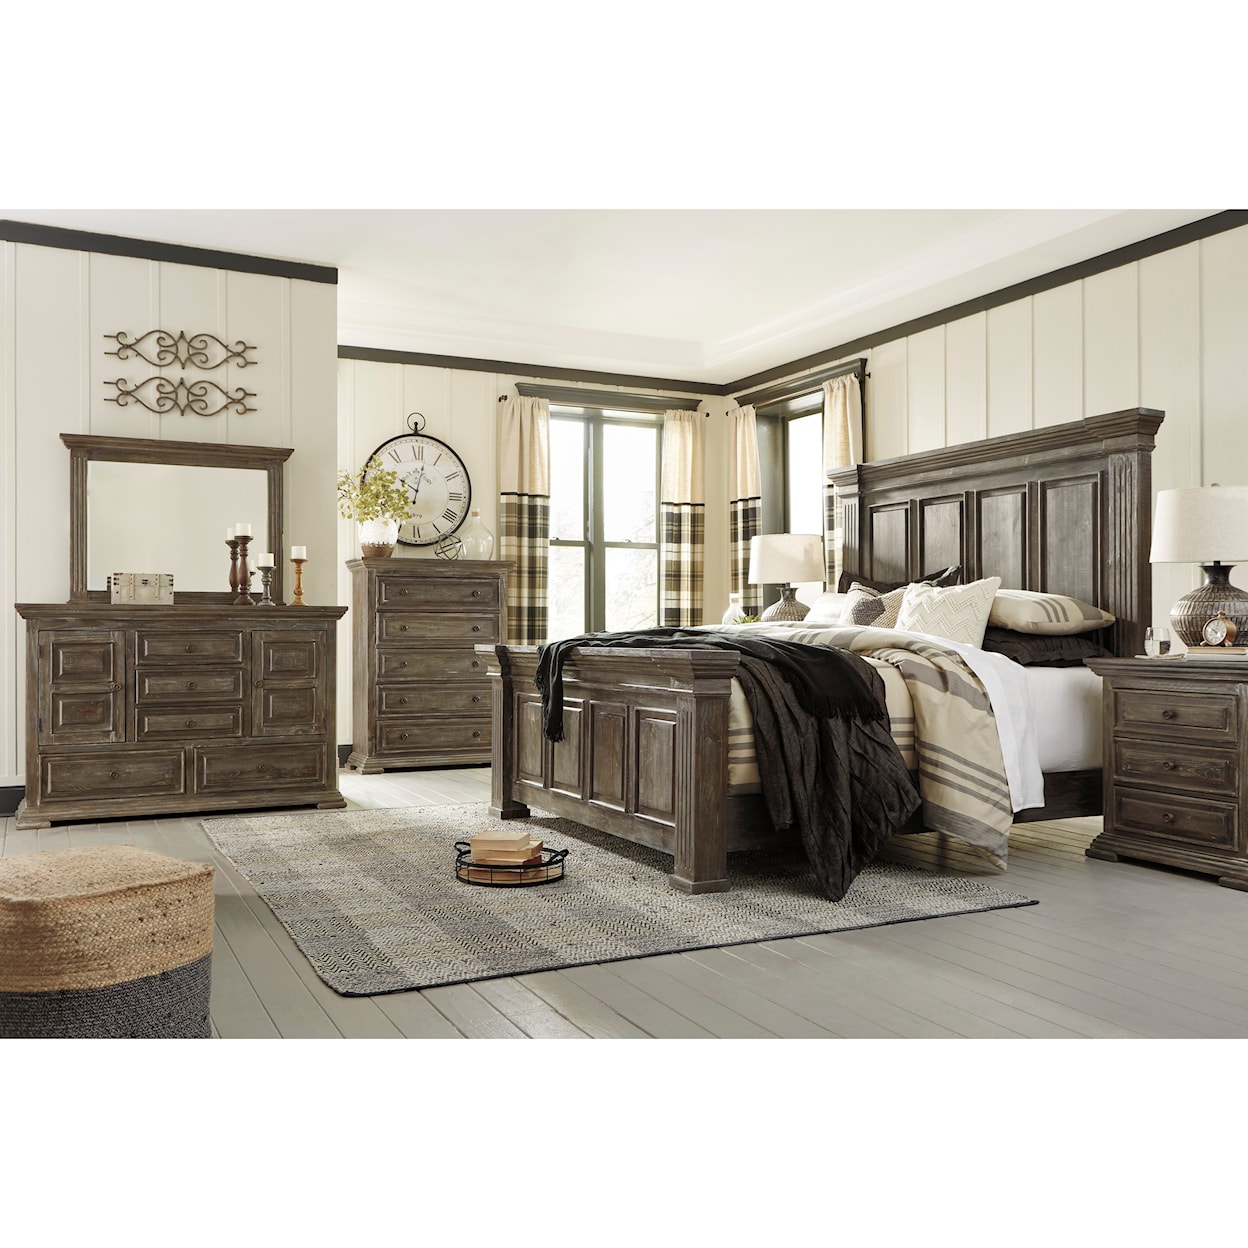 Signature Design by Ashley Wyndahl King Bedroom Group